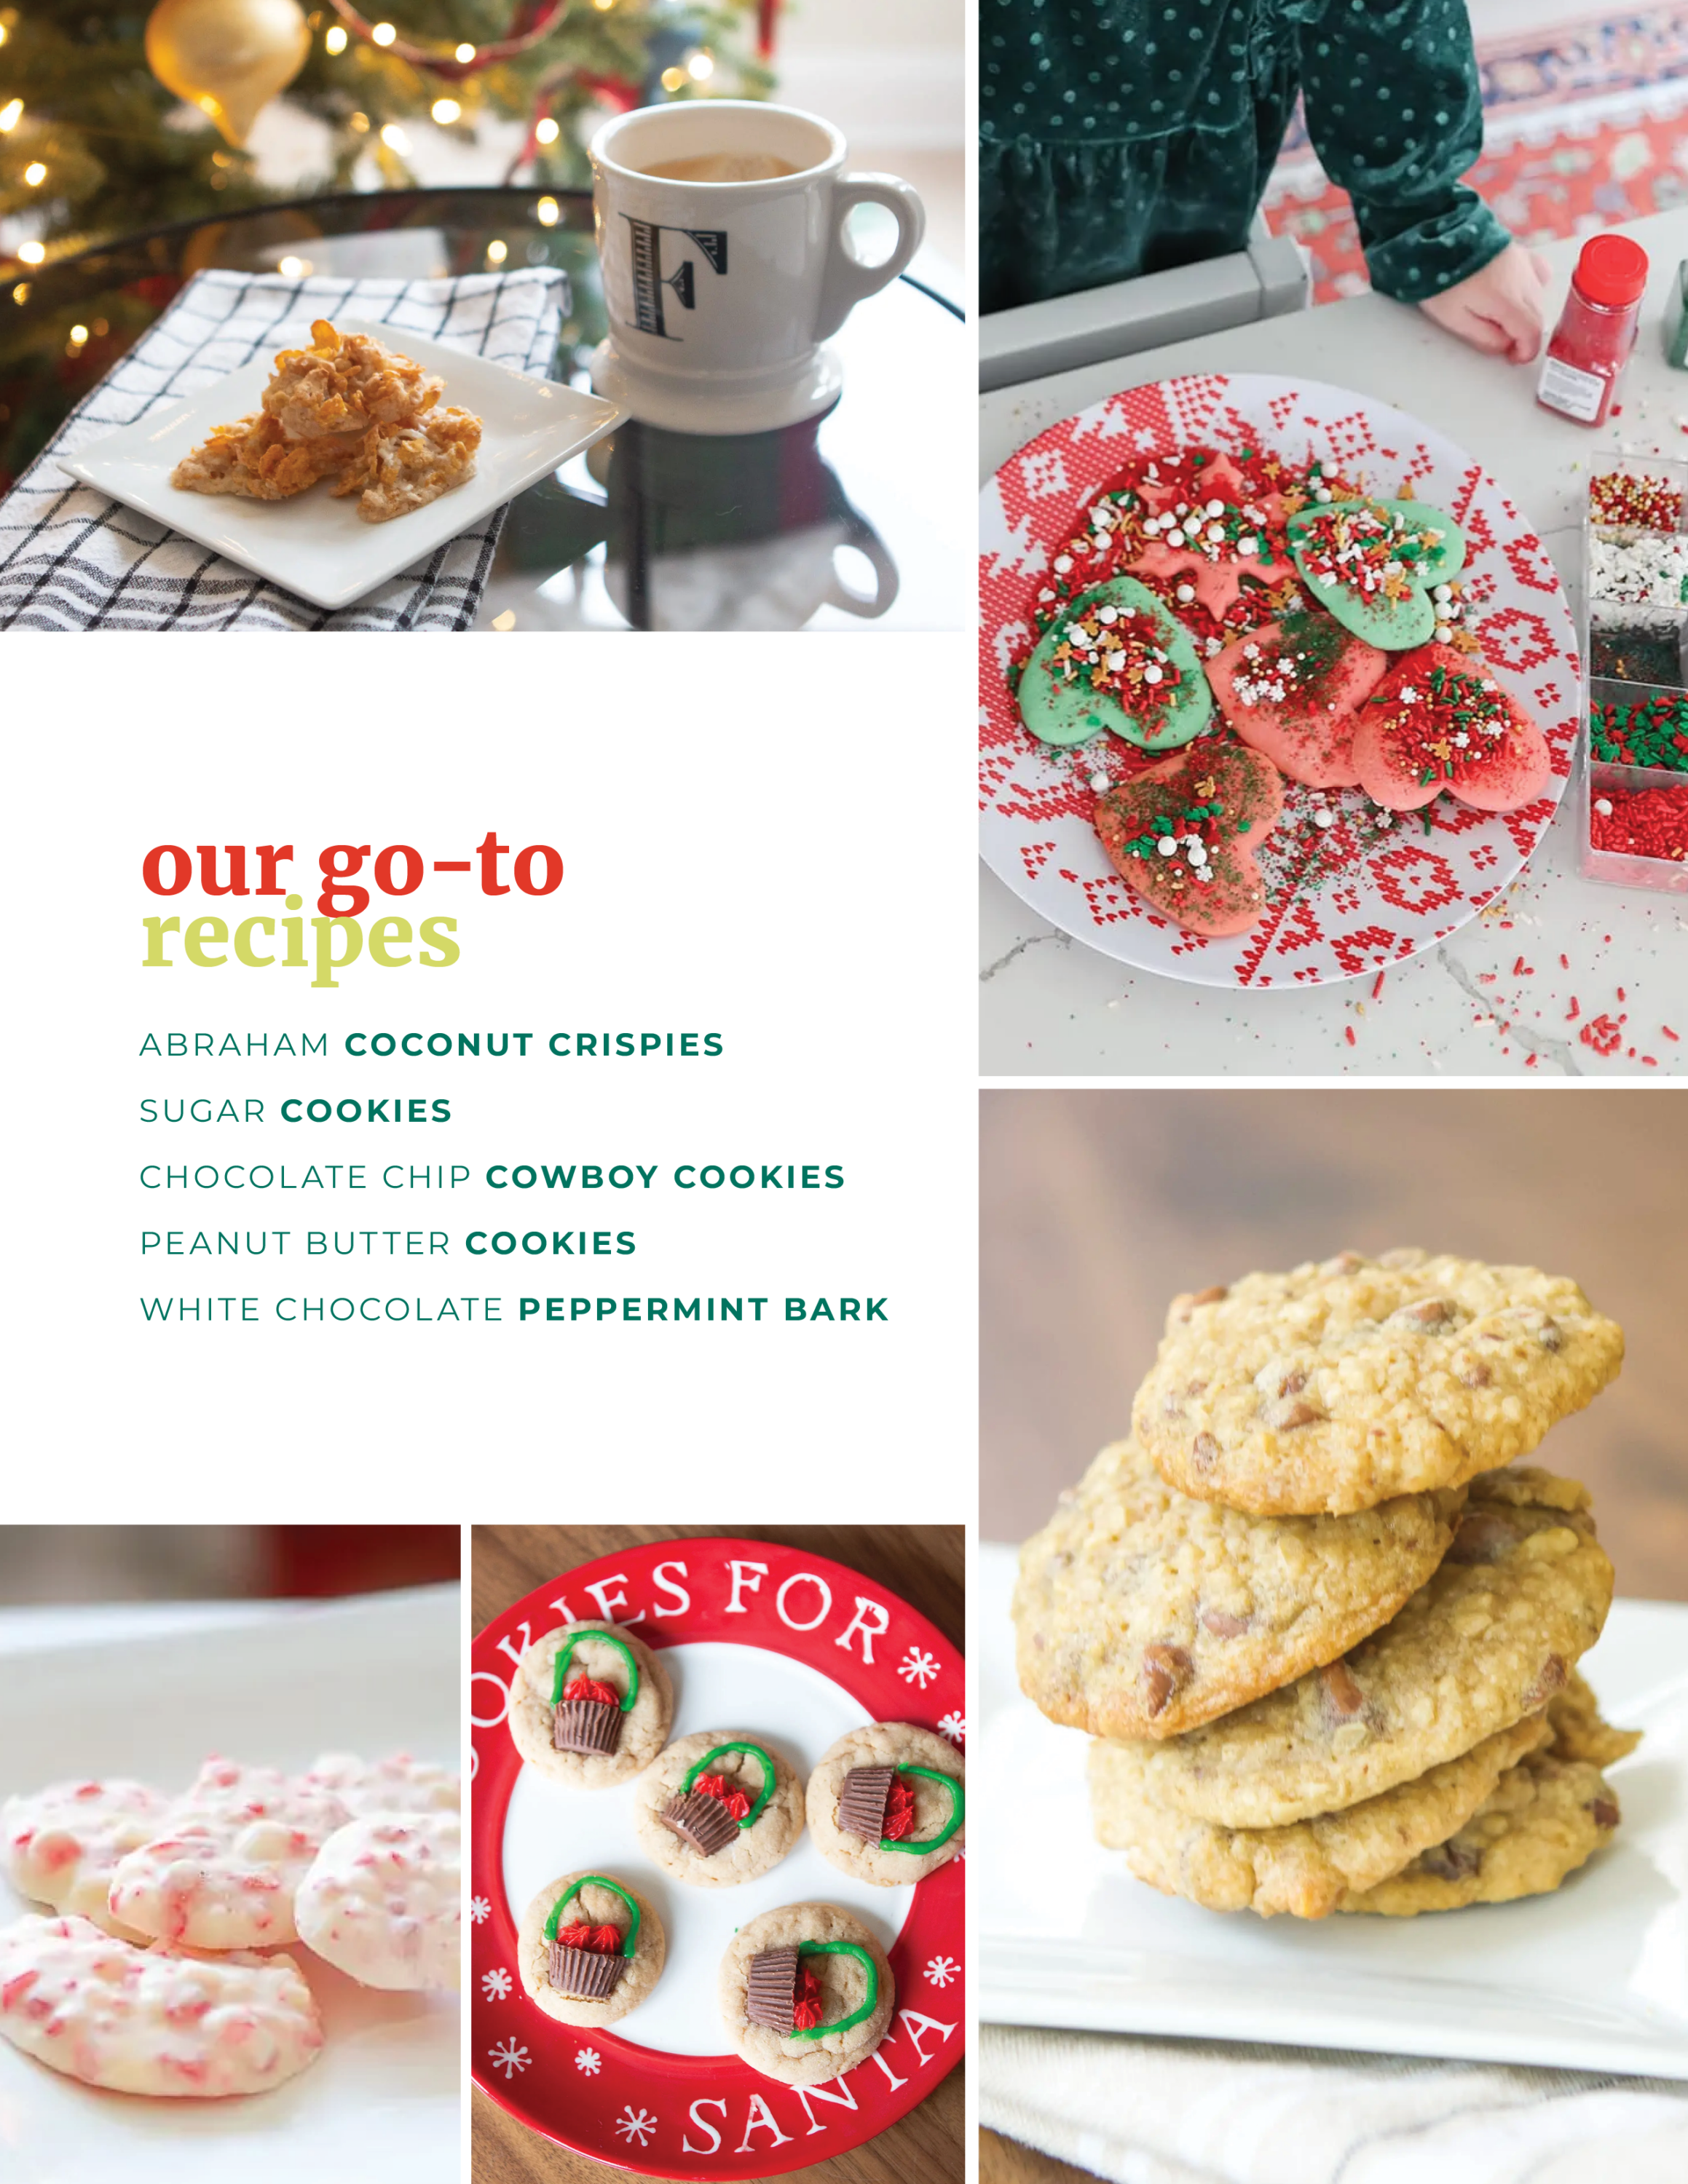 Cookie recipes for your holiday festivities